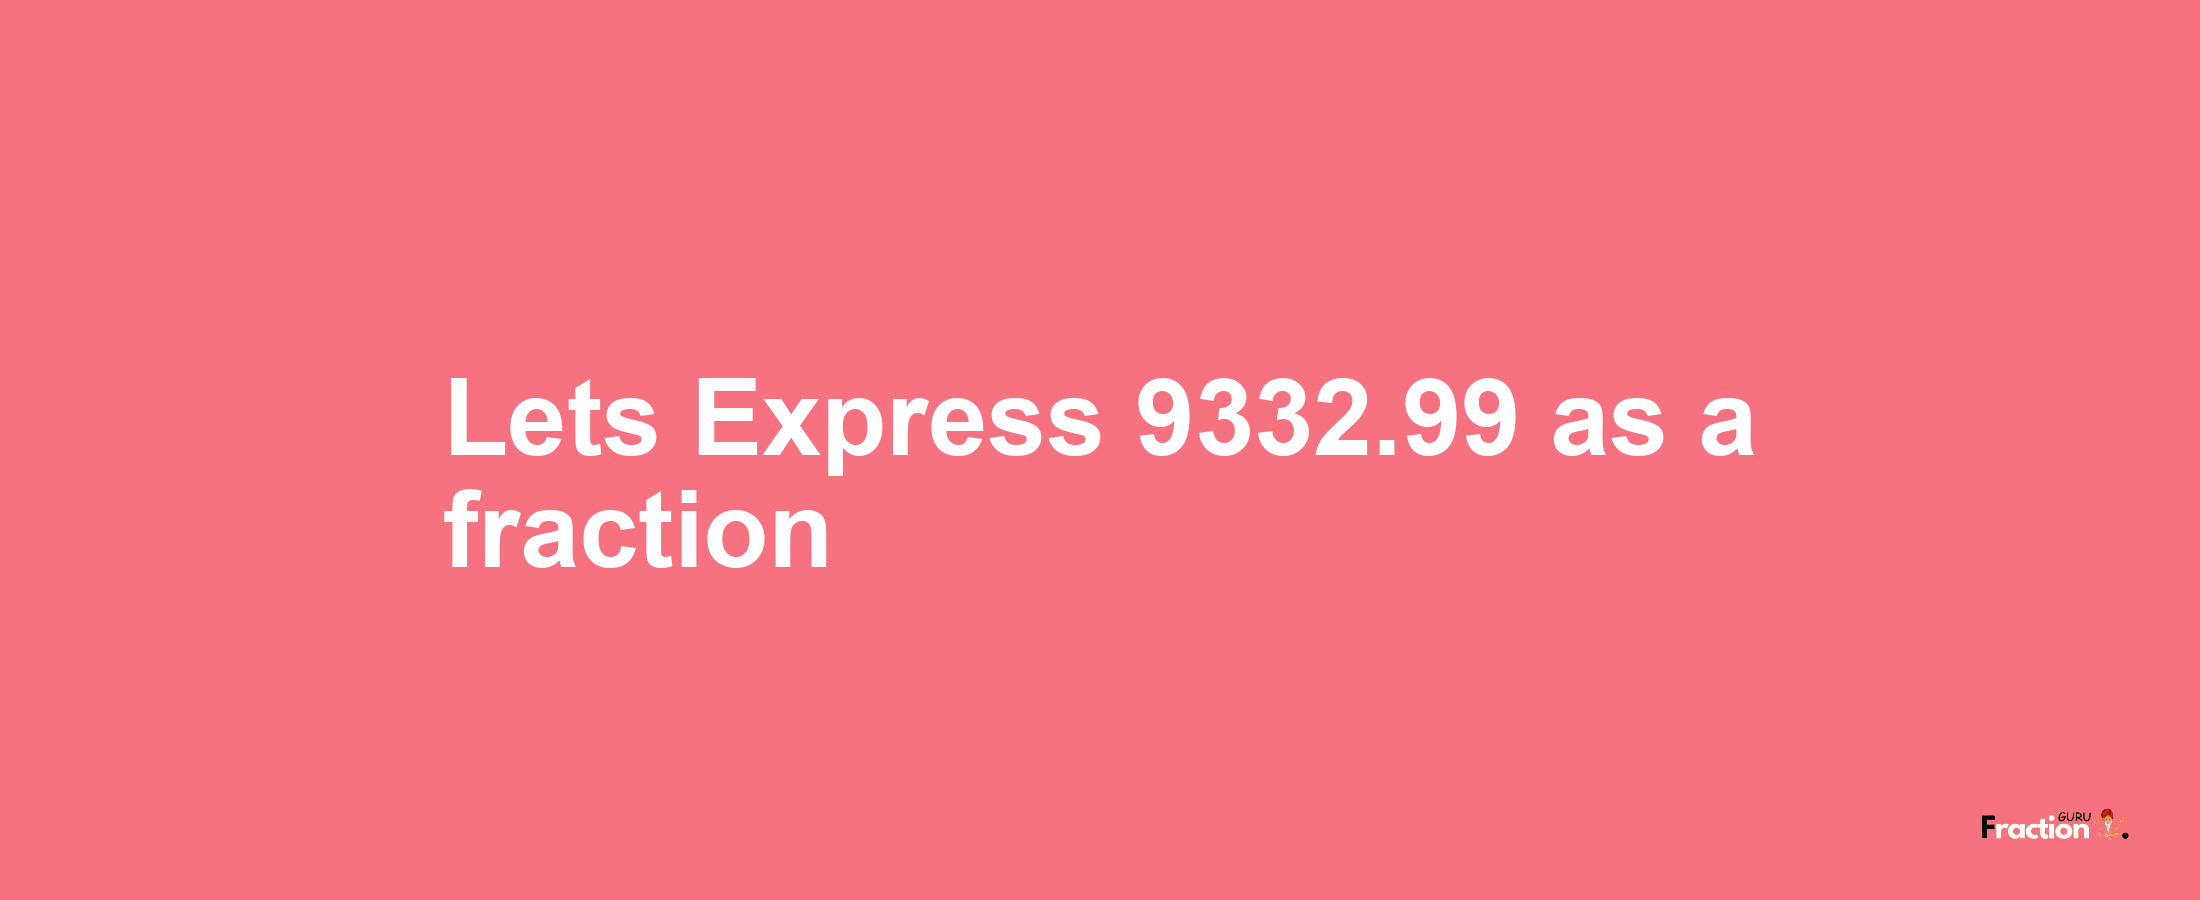 Lets Express 9332.99 as afraction